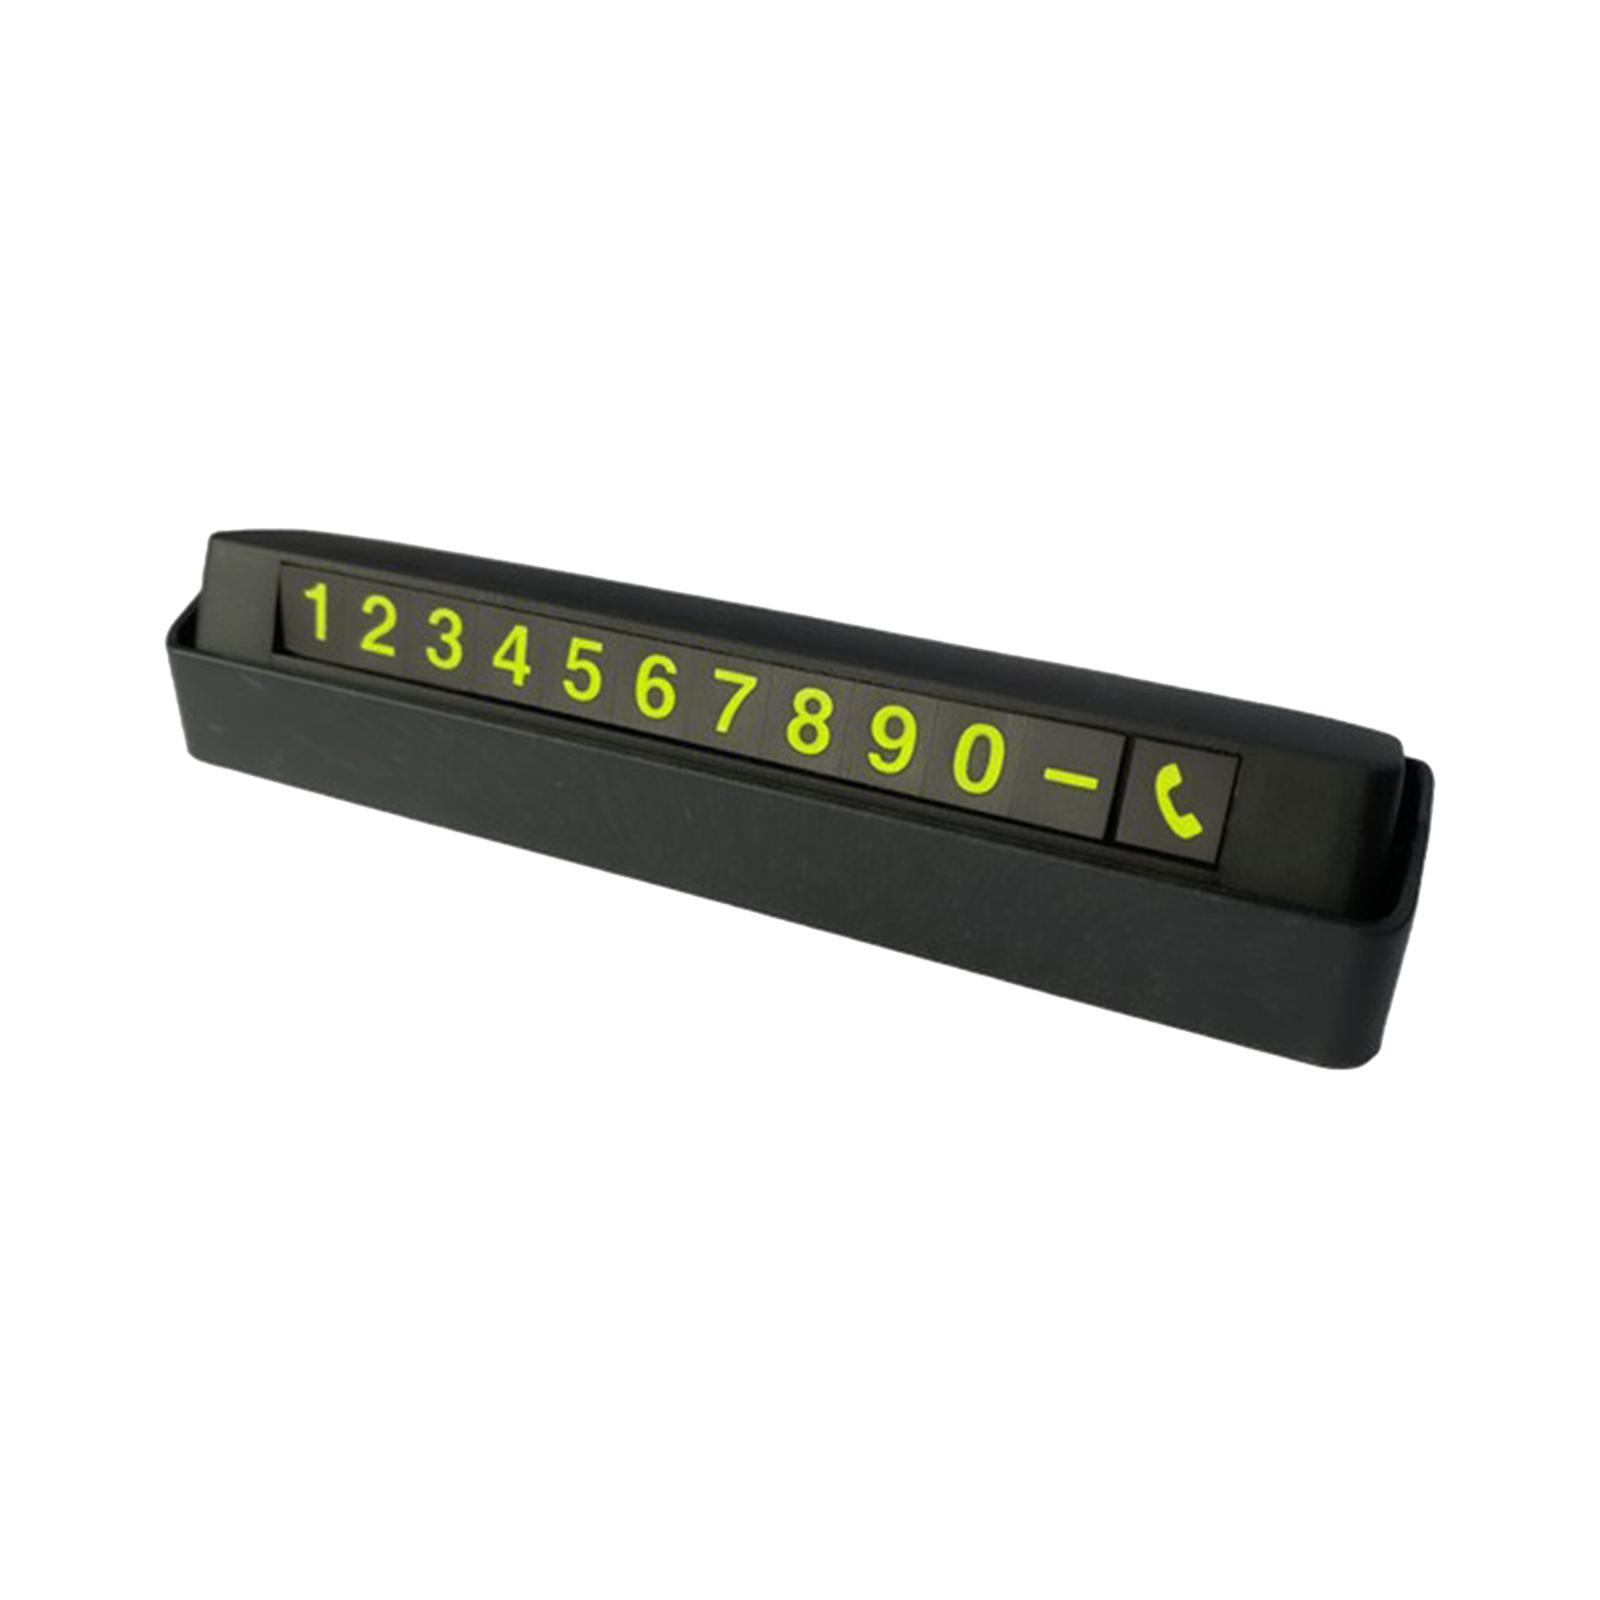 Car Parking Number Plate Dashboard Decoration Notification Phone Number Card